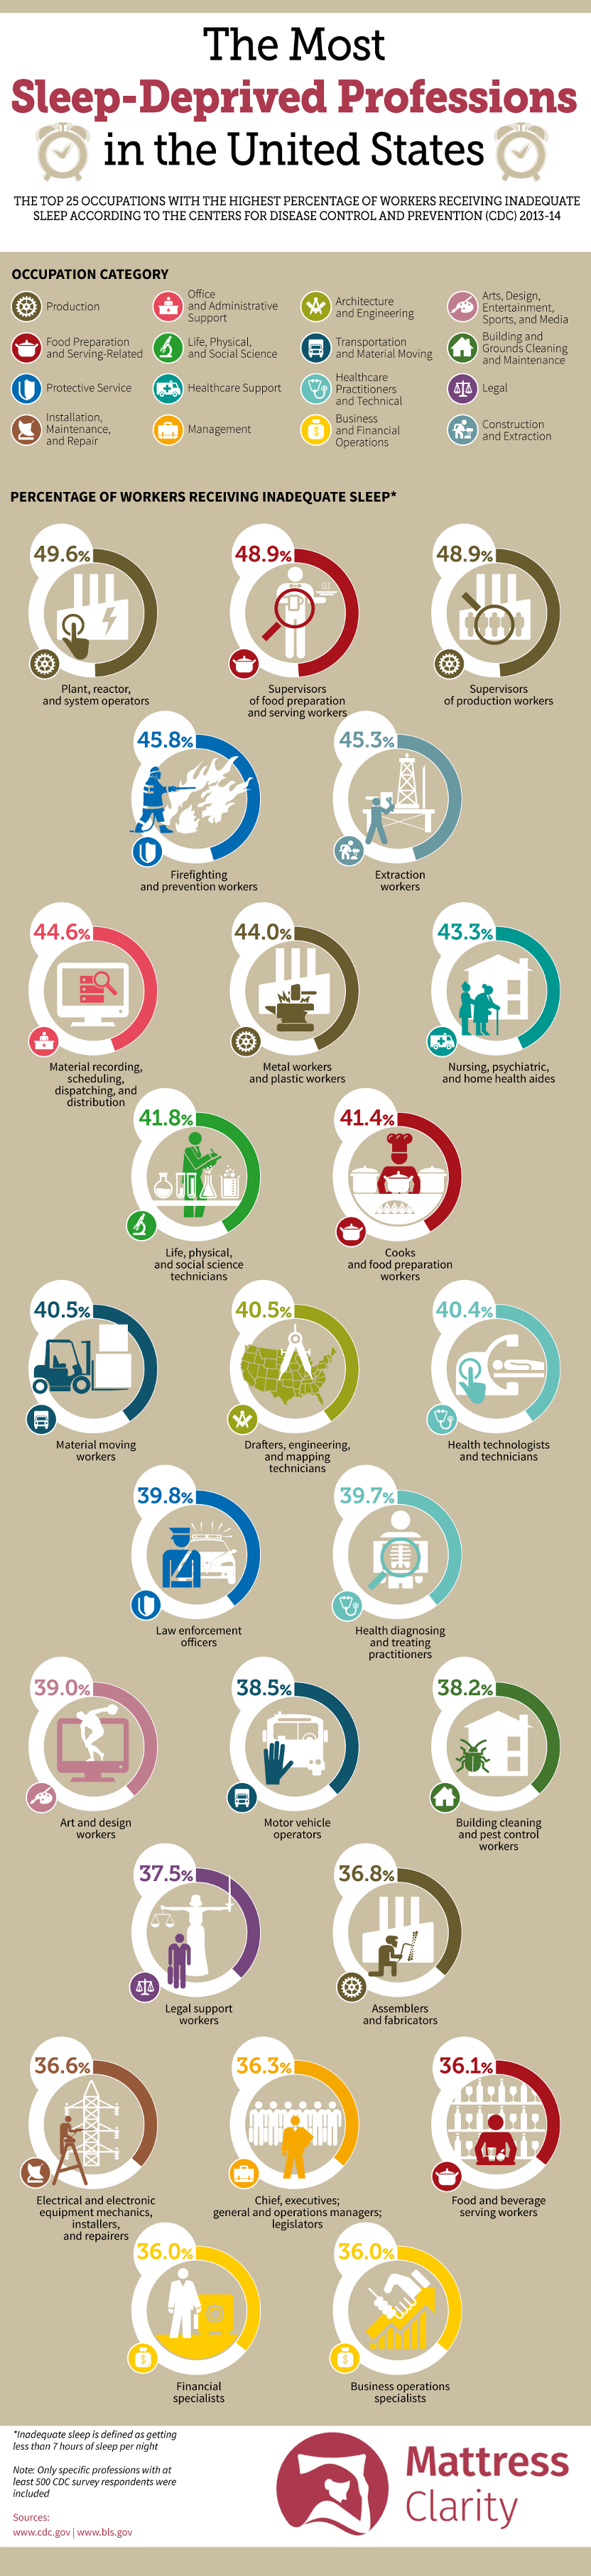 Does Your Work Snatch Away Sleep? 25 Most Sleep-Deprived Professions in USA - Infographic